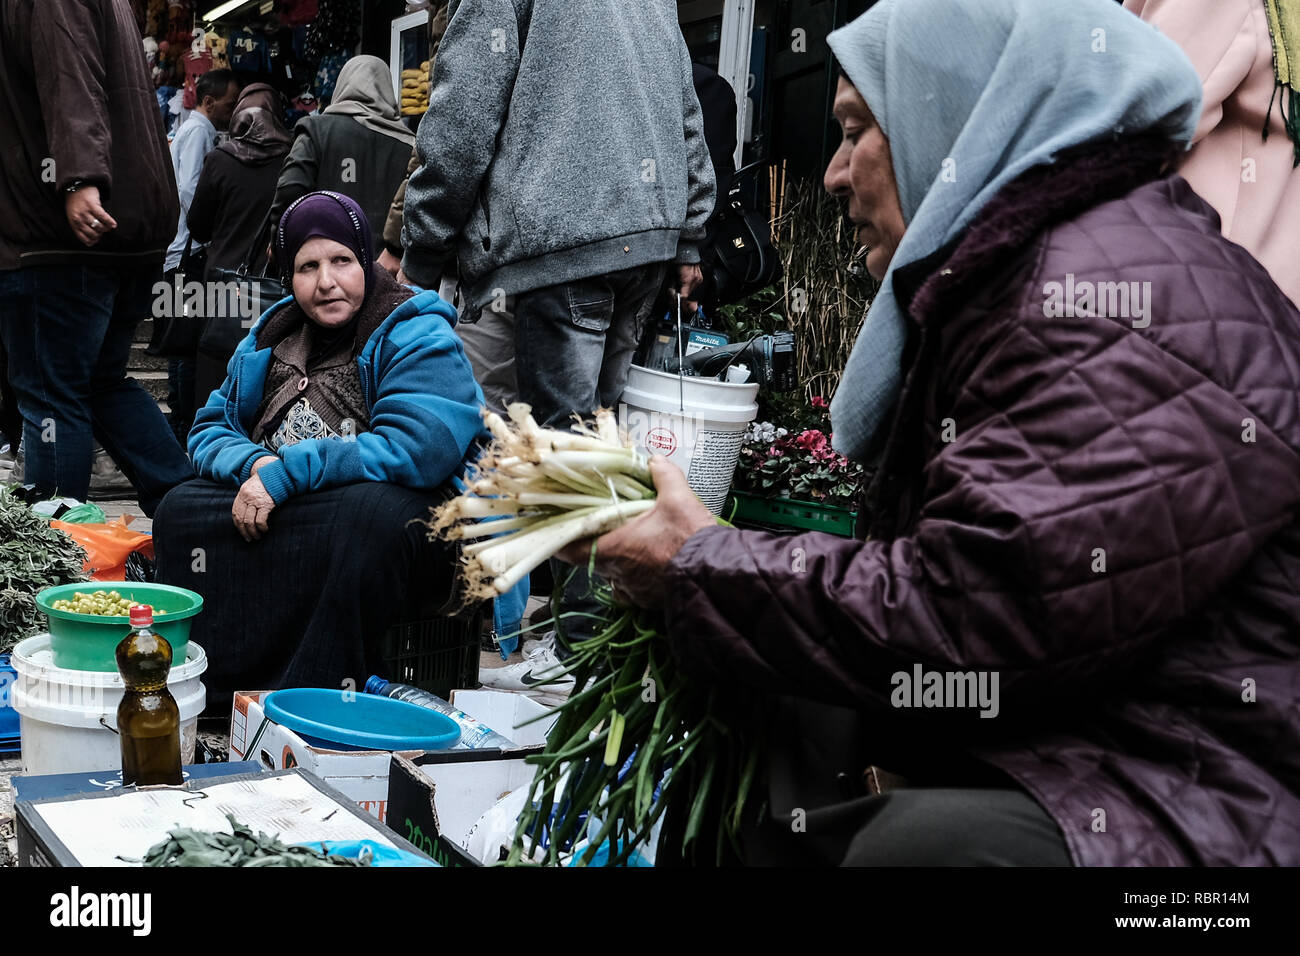 Vendors sell agricultural produce on Al Wad or Hagai Street in the Old City's Muslim Quarter near the Damascus Gate. Stock Photo